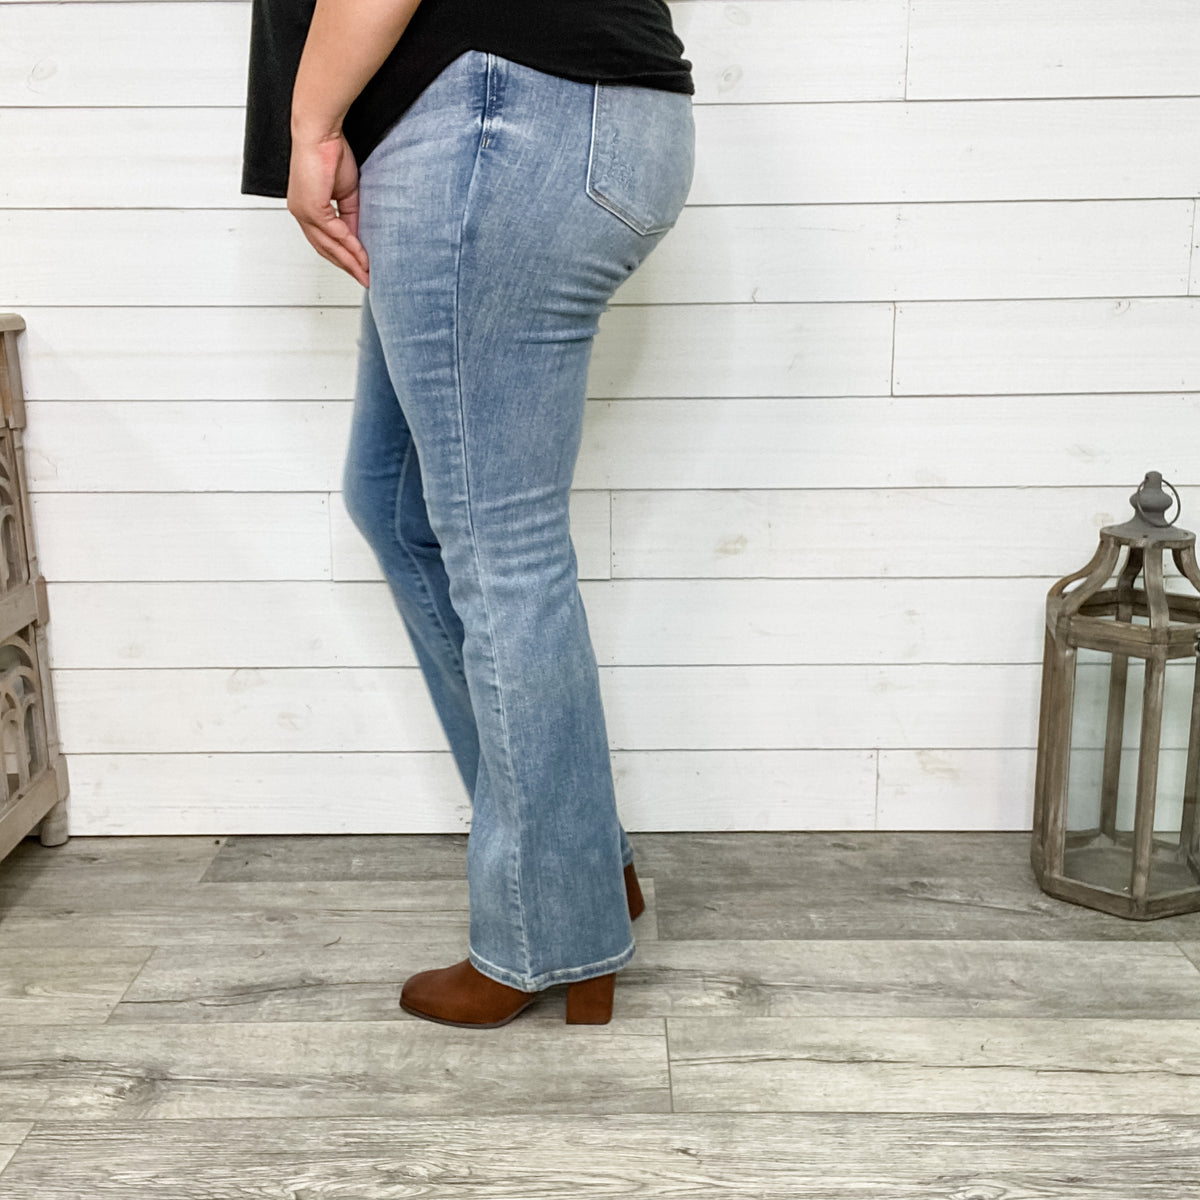 Judy Blue "Drink A Beer" Bootcut Jeans